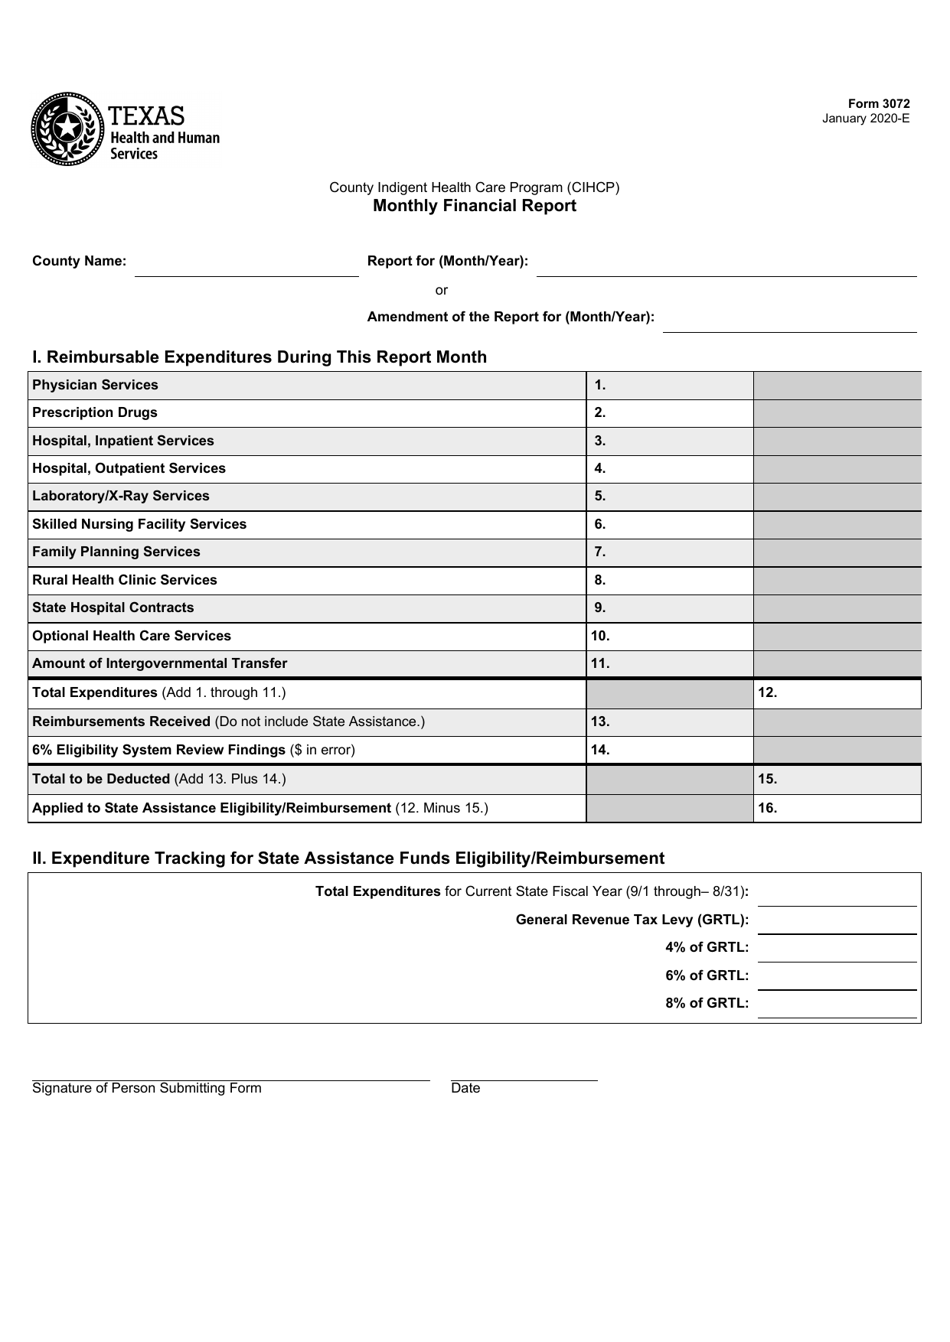 Form 3072 County Indigent Health Care Program (Cihcp) Monthly Financial Report - Texas, Page 1